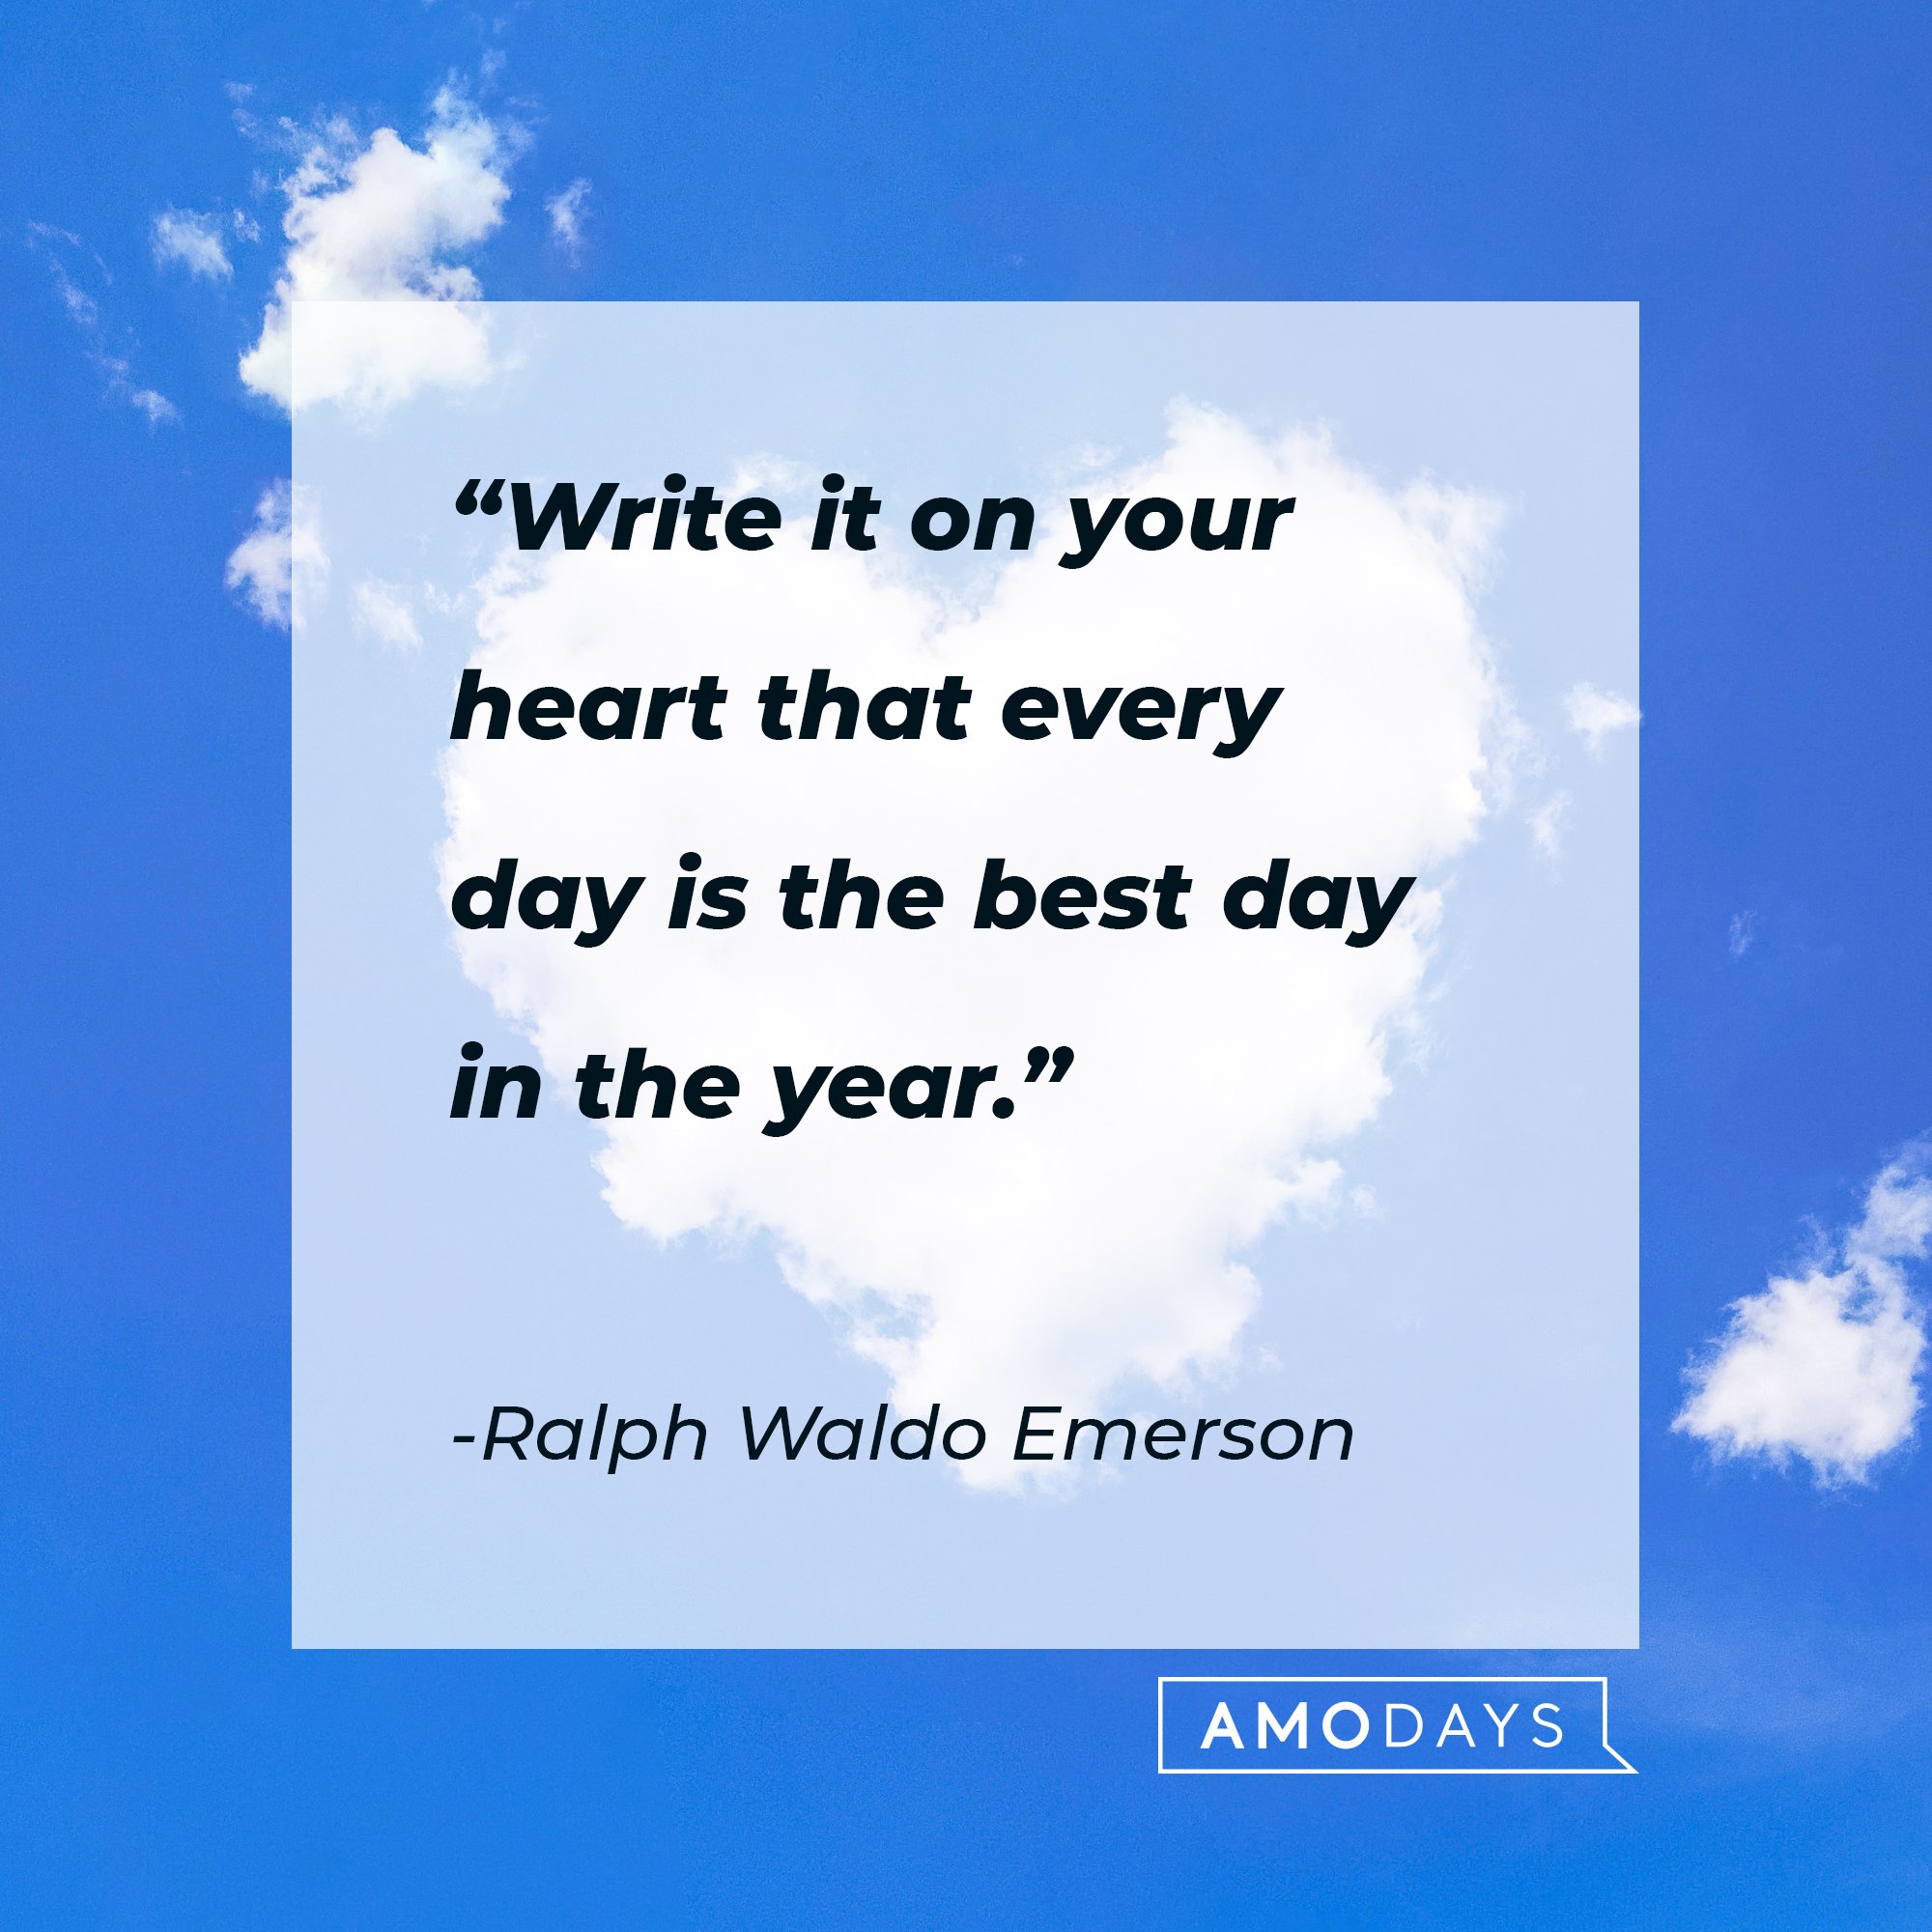 Ralph Waldo Emerson's quote: "Write it on your heart that every day is the best day in the year." | Image: AmoDays 